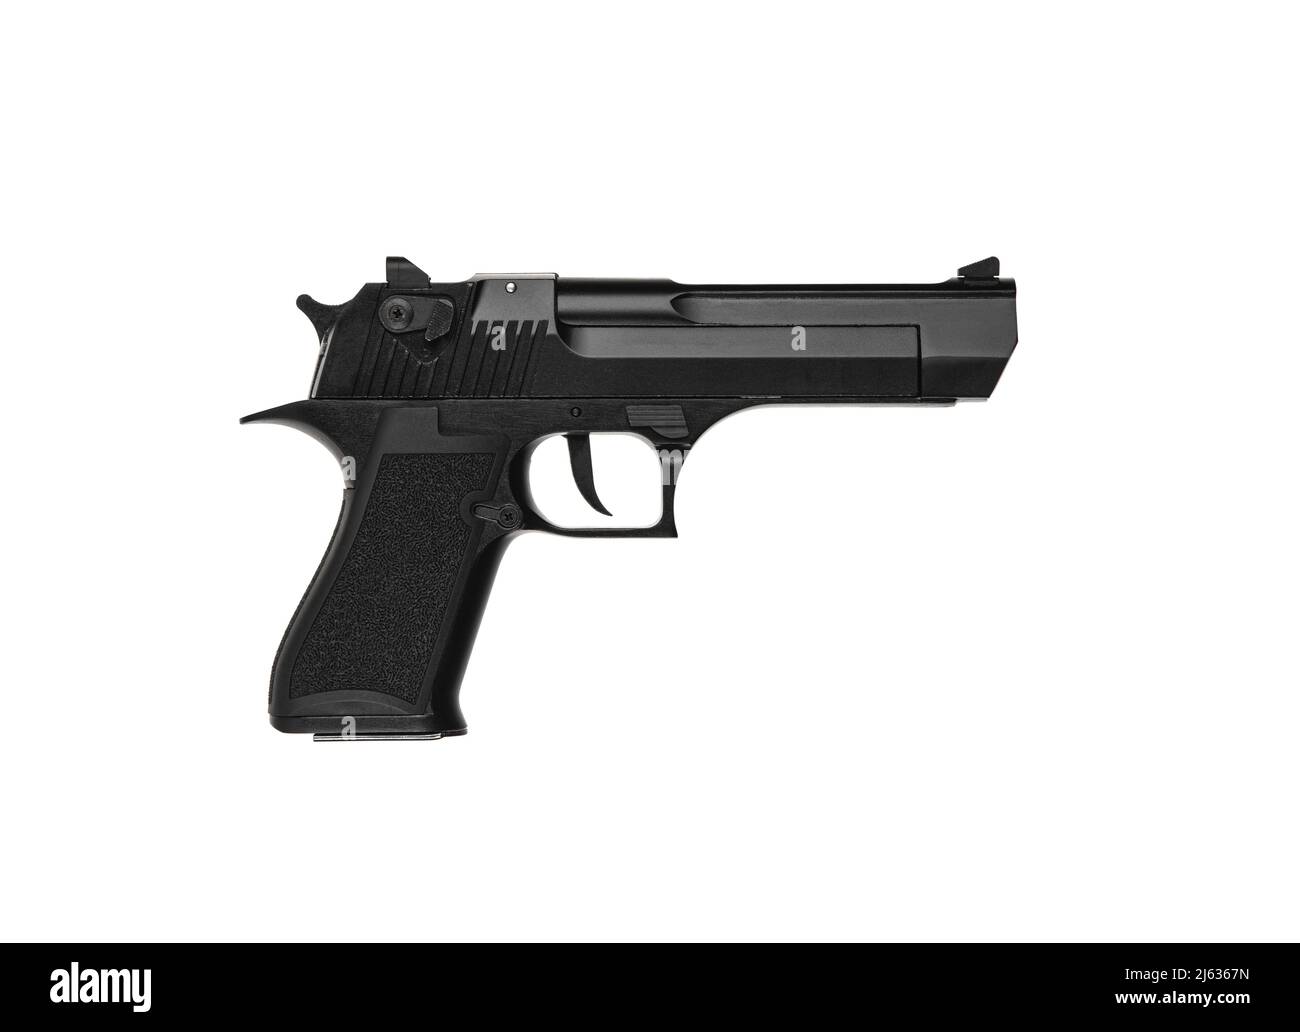 Modern semi-automatic pistol. A short-barreled weapon for self-defense. Arming the police, special units and the army. Isolate on a white background. Stock Photo